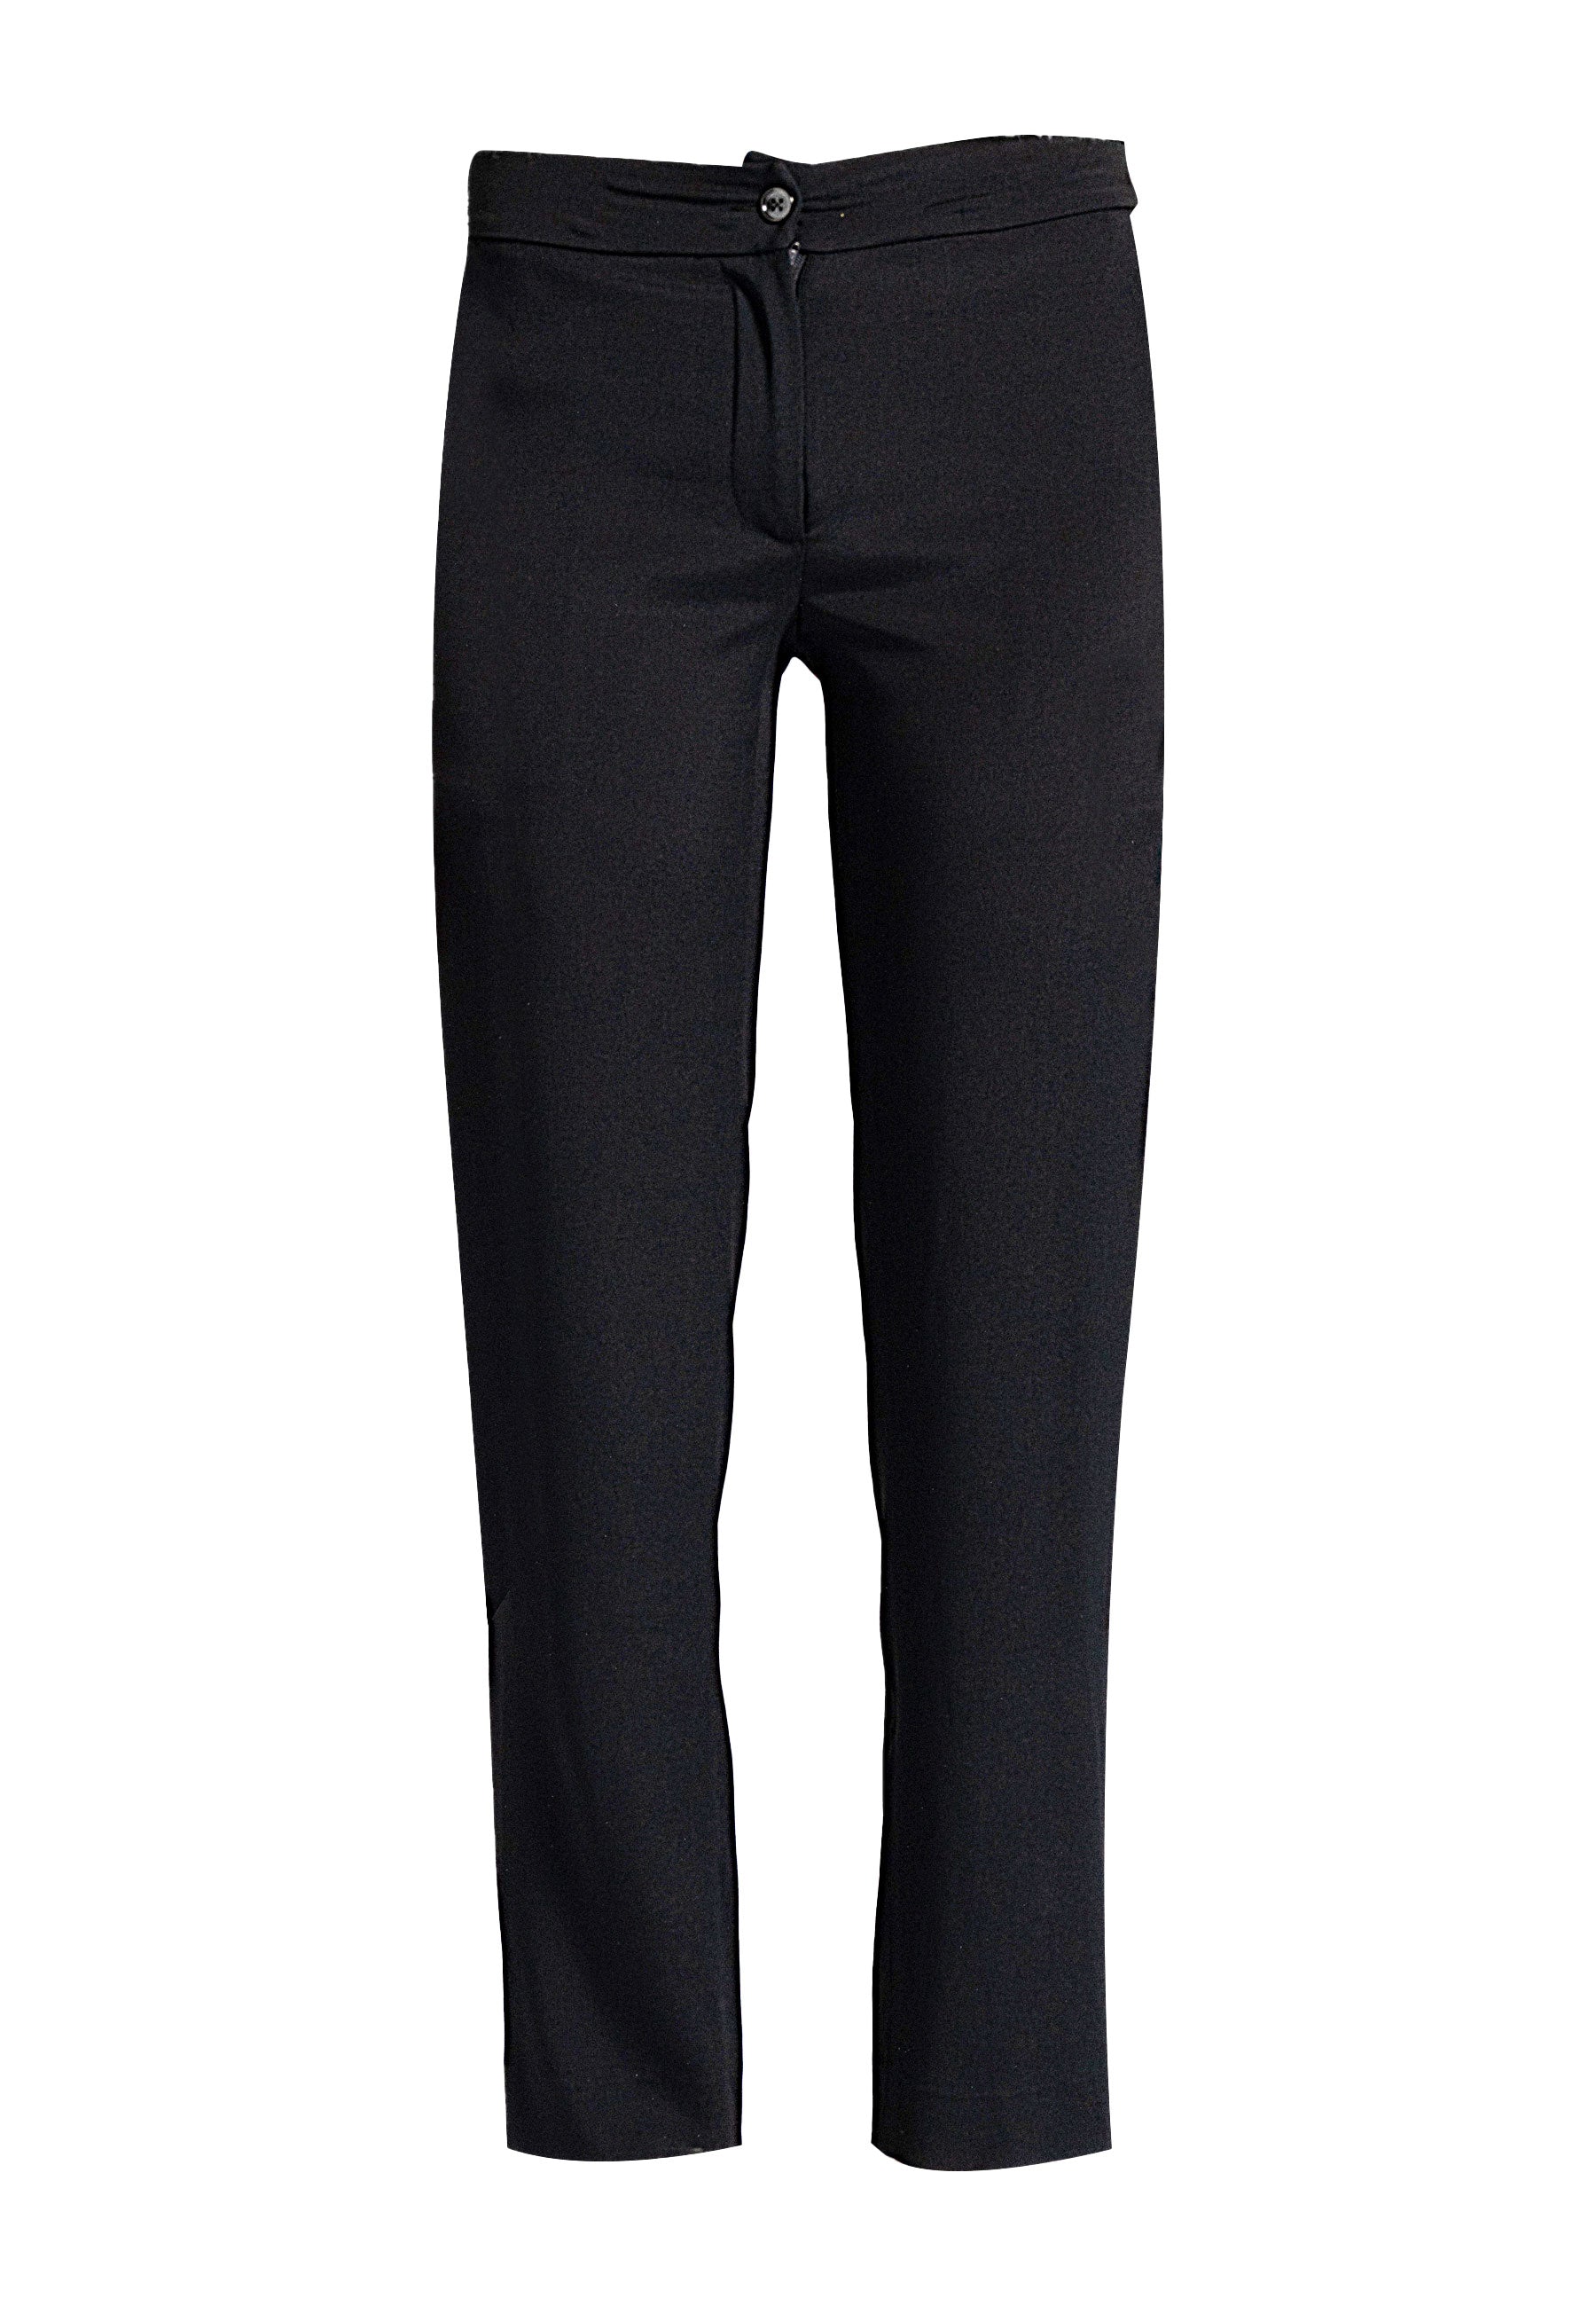 black pants ankle length pants women's ankle length pants ladies work pants with pockets australia black pants women black pants black trousers for women black trousers designer pants black pants with pockets black office pants for ladies designer pants for women